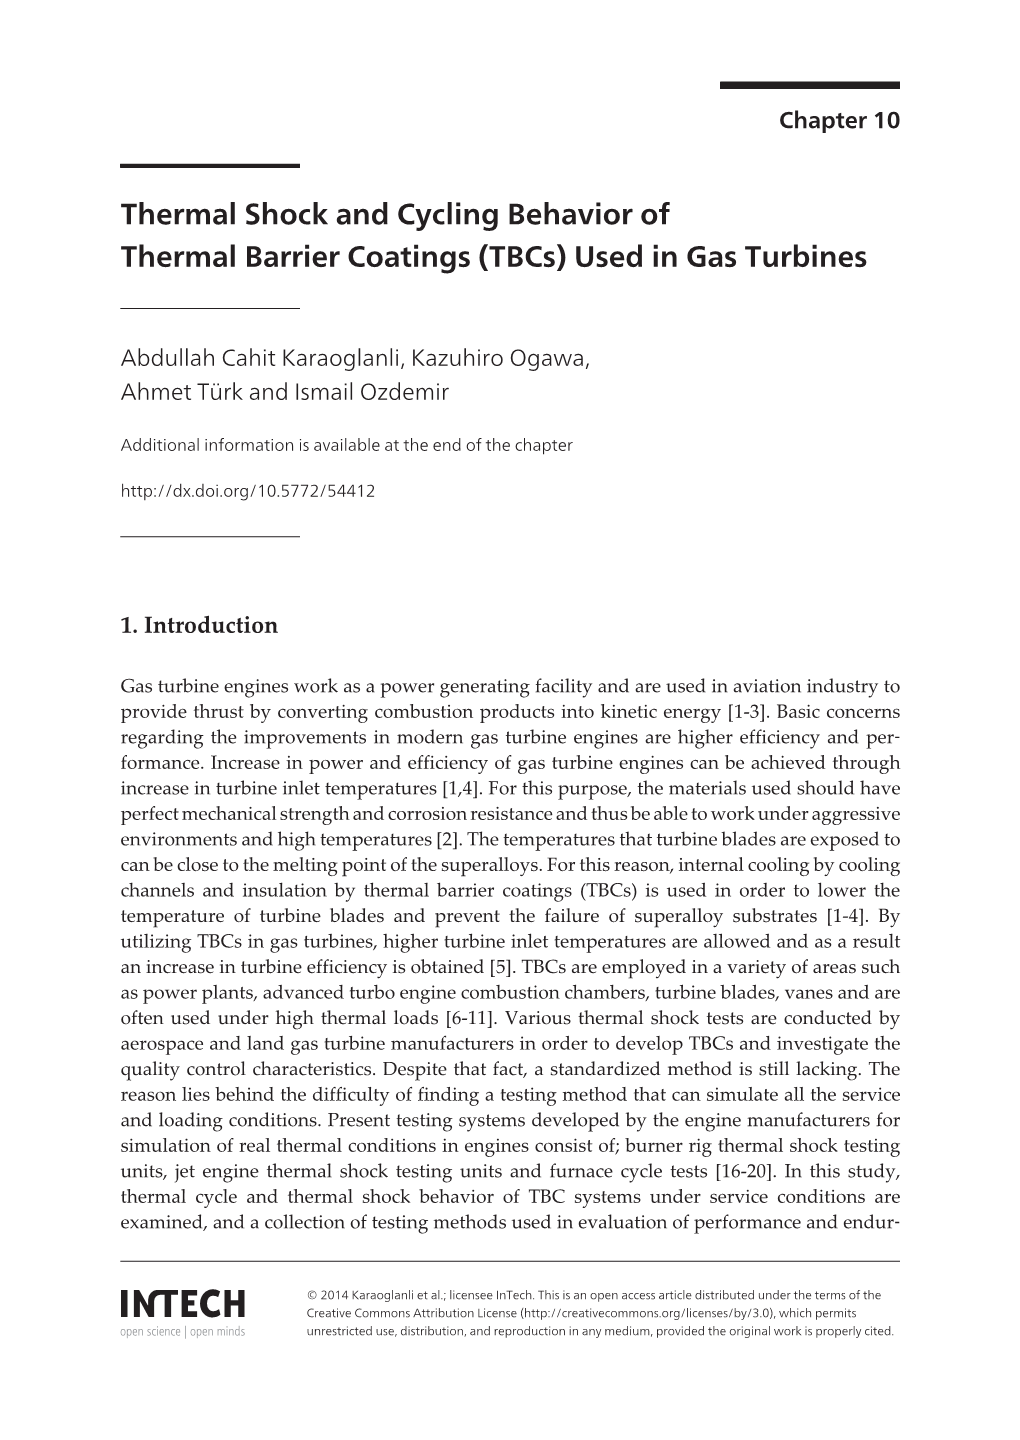 Thermal Shock and Cycling Behavior of Thermal Barrier Coatings (Tbcs) Used in Gas Turbines